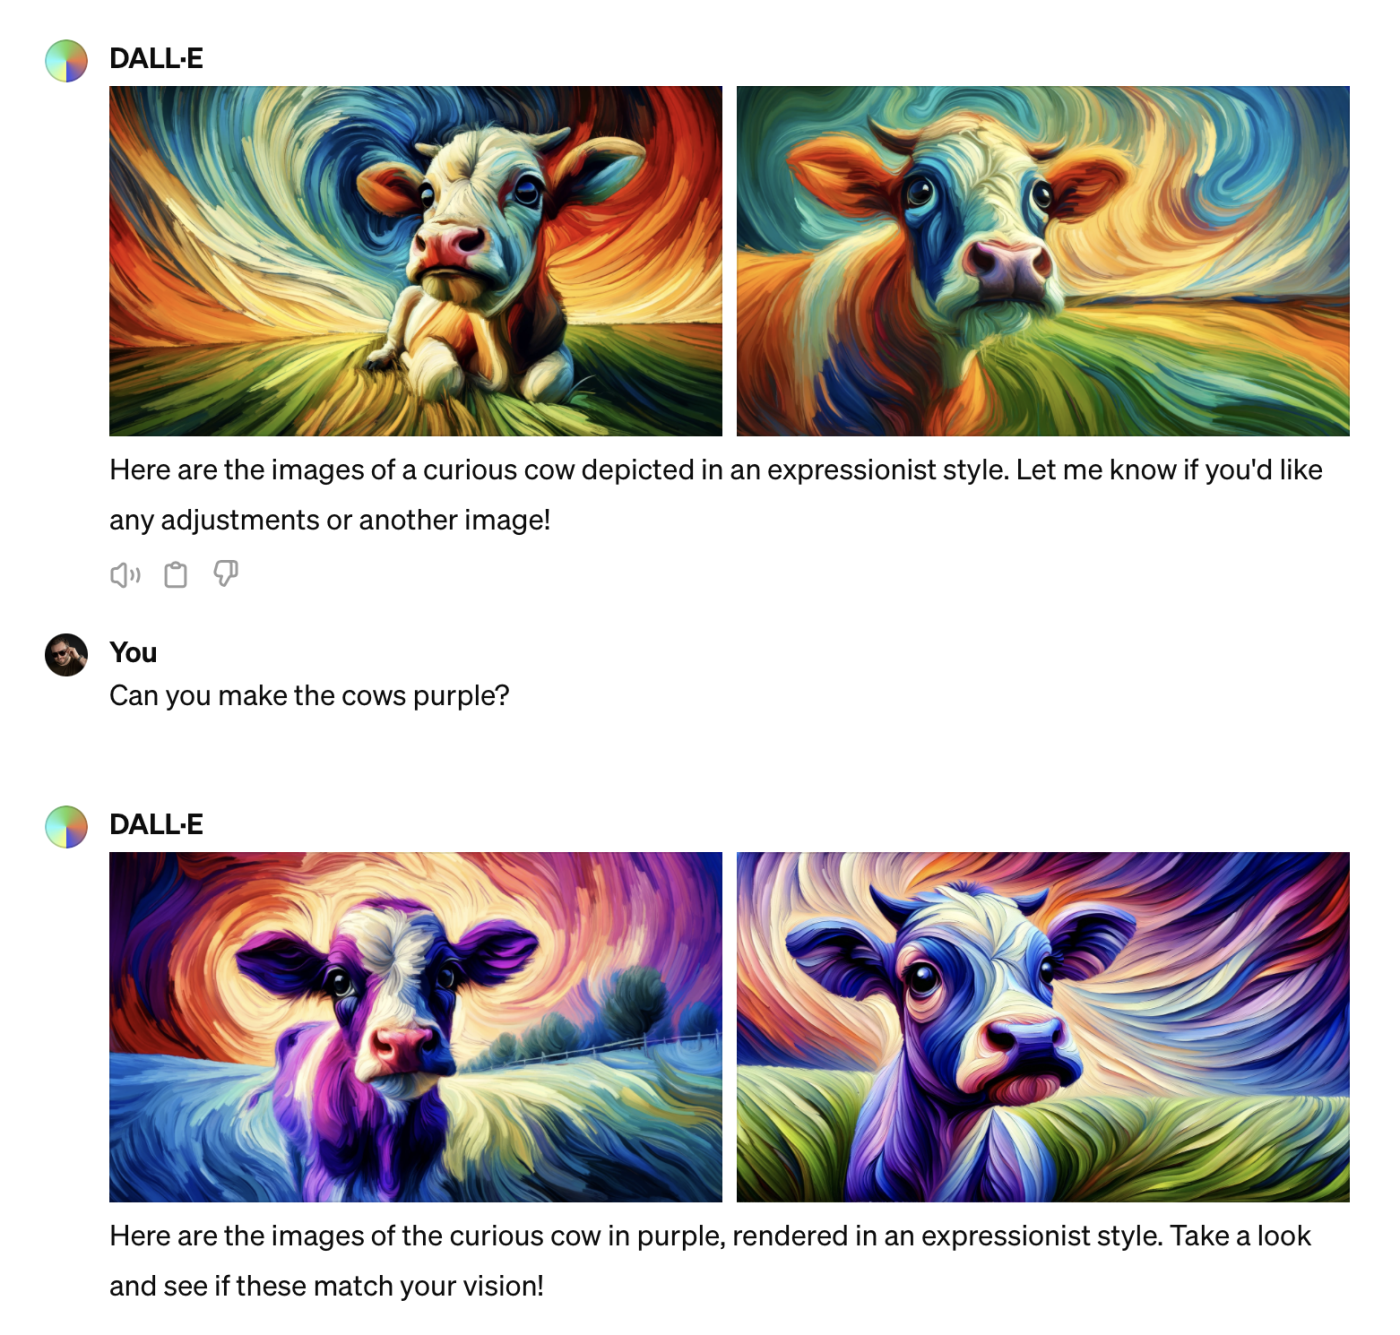 ChatGPT showing a side-view of the existing images after the prompt asked "Can you make the cows purple?"